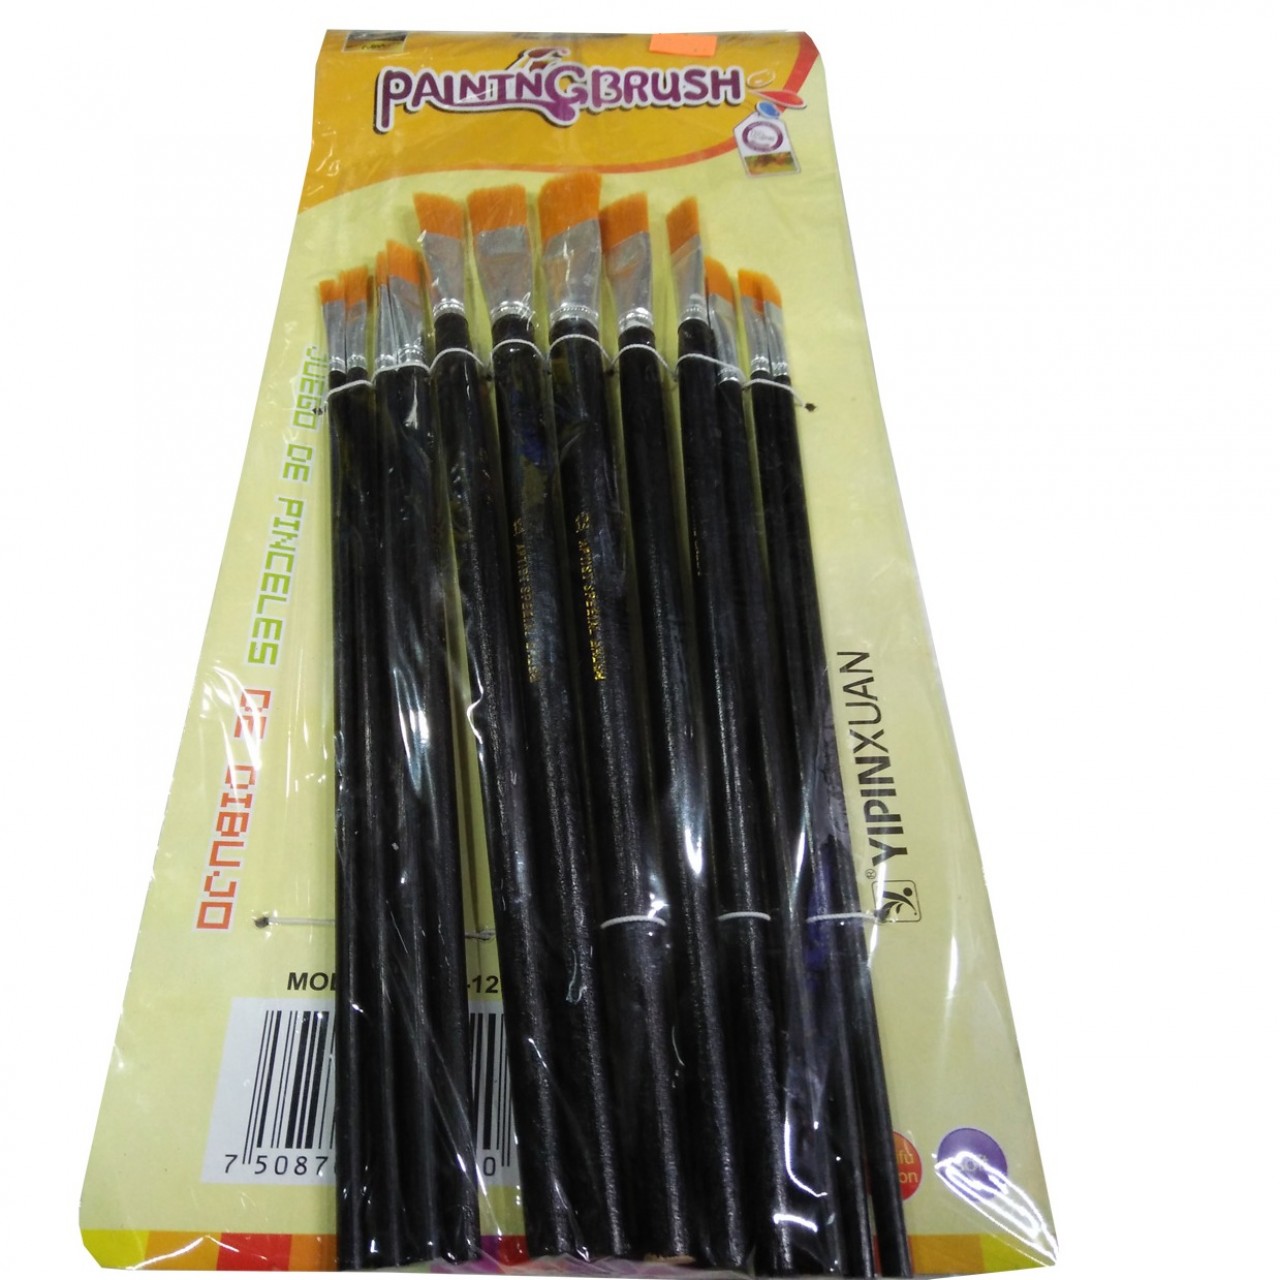 Paint Brushes For Painting - 12 Pieces - Black color